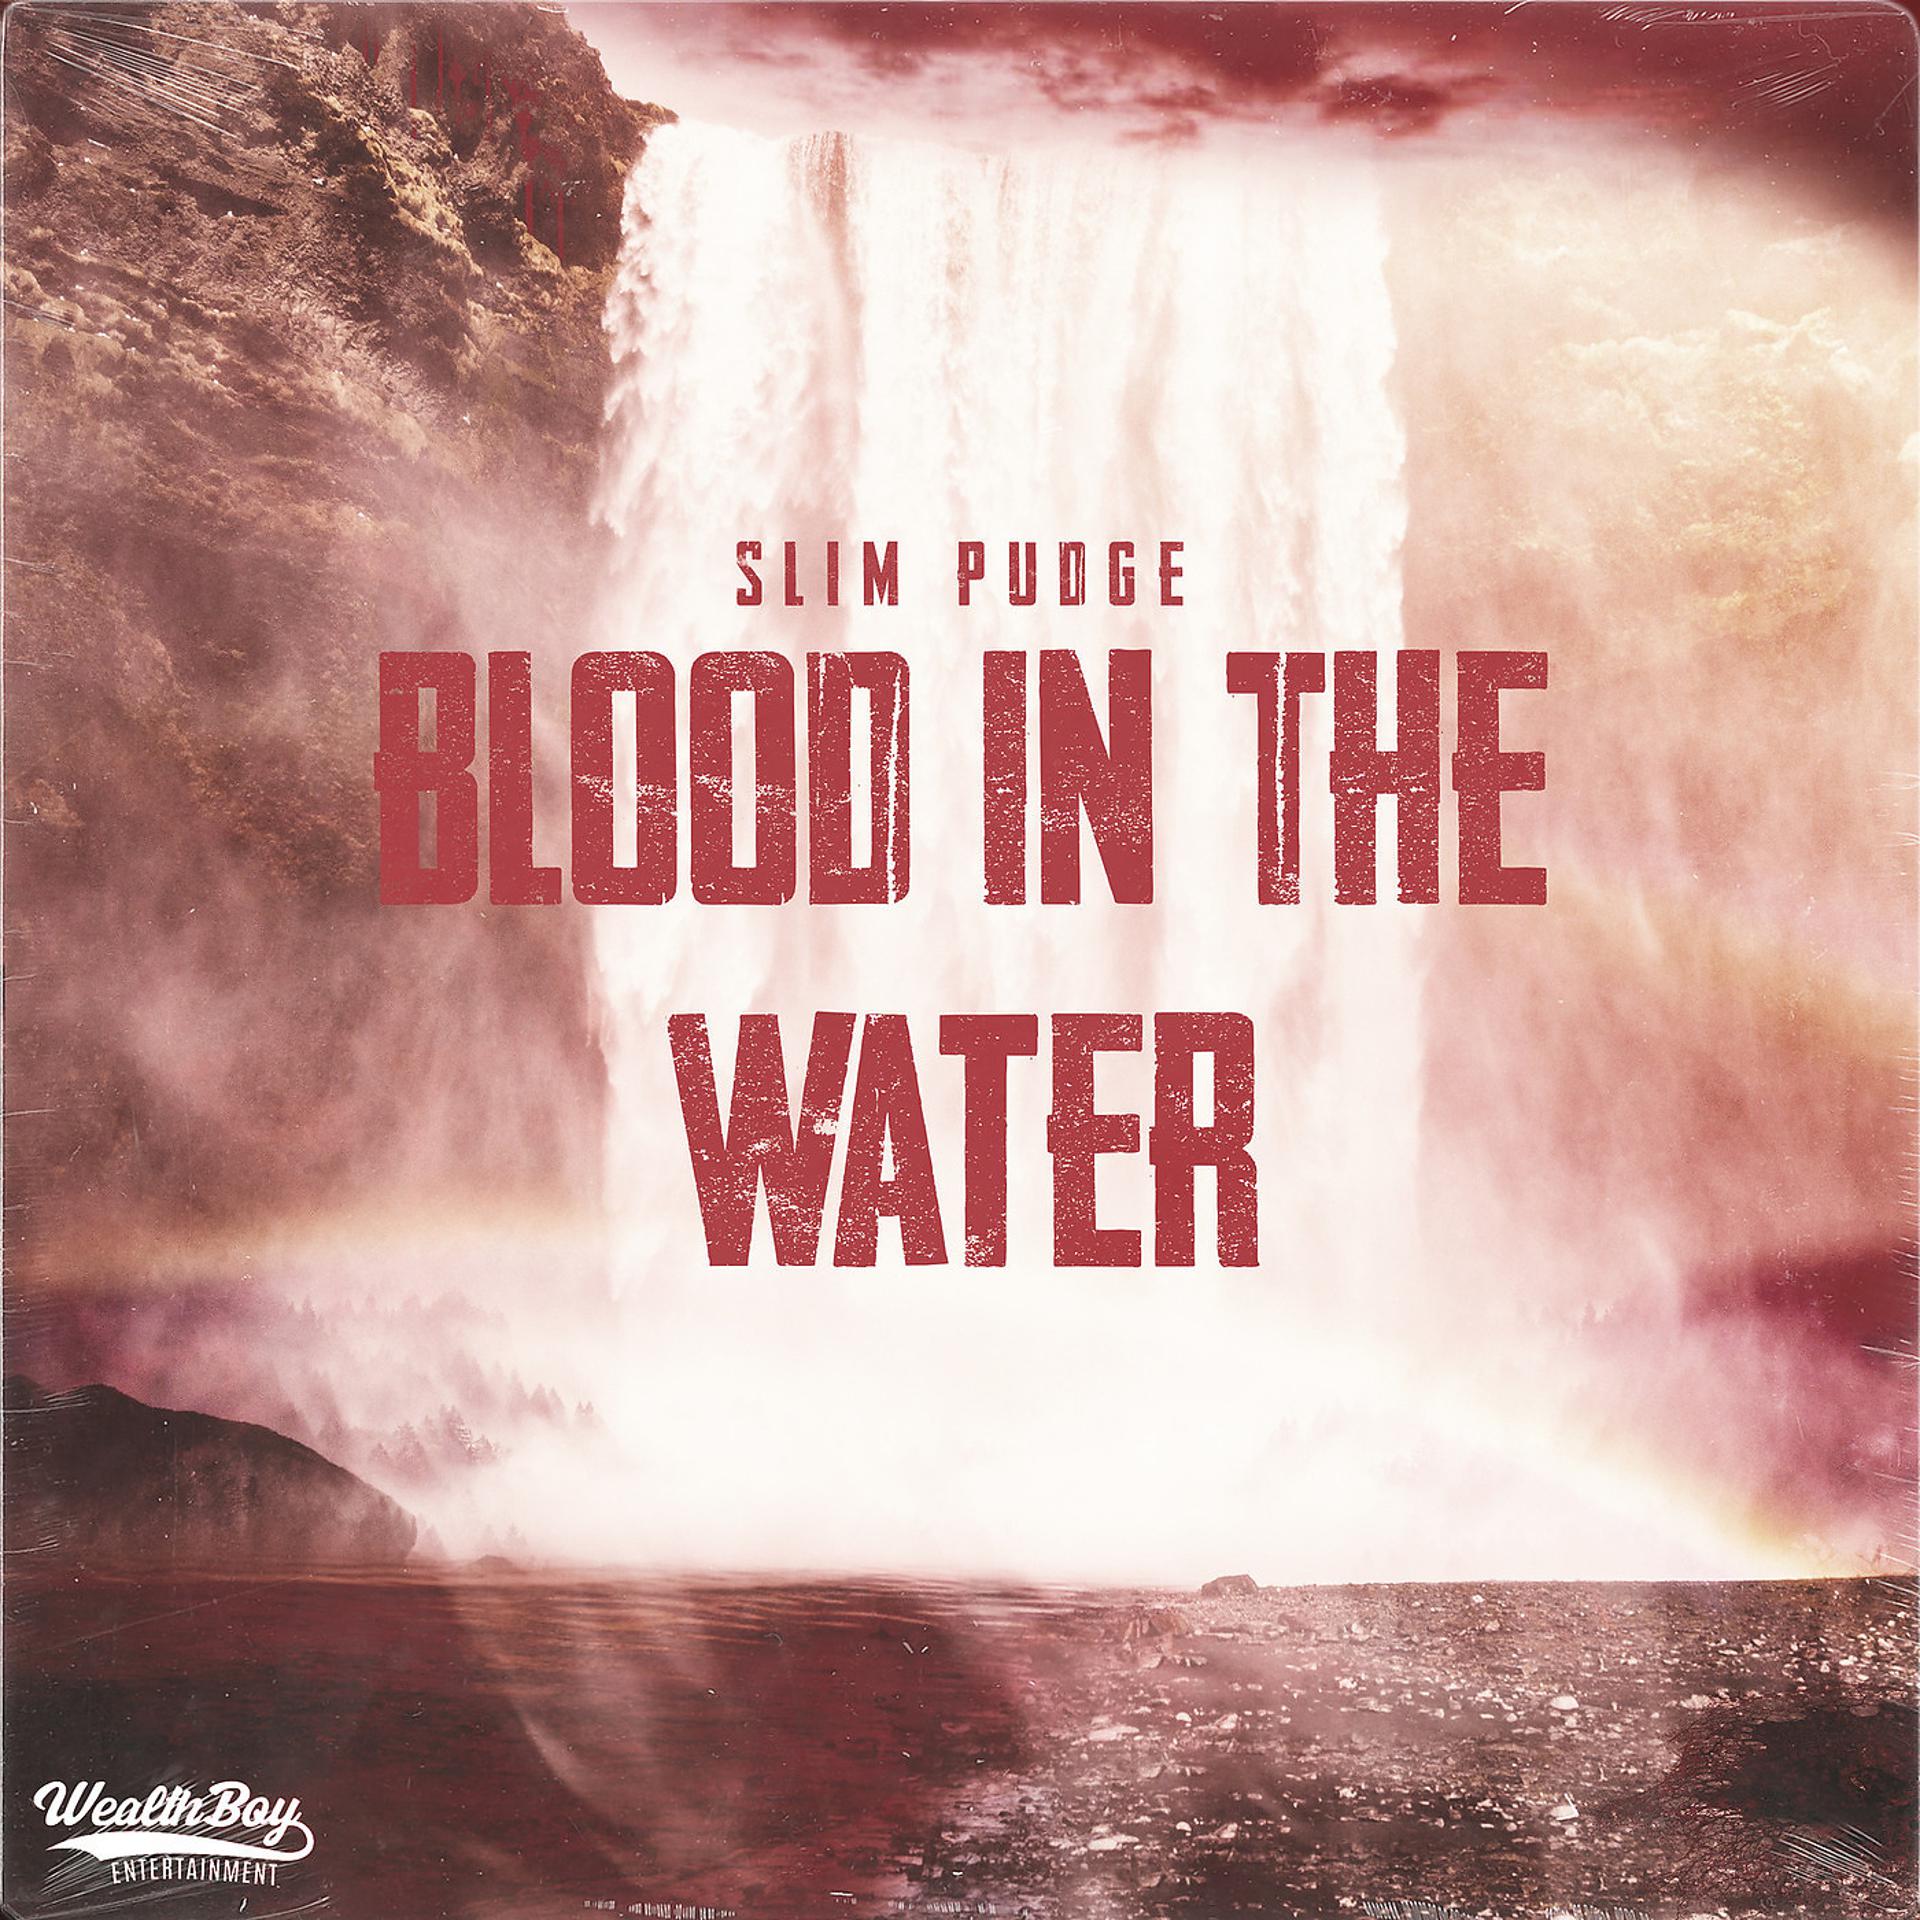 Постер альбома Blood in the Water